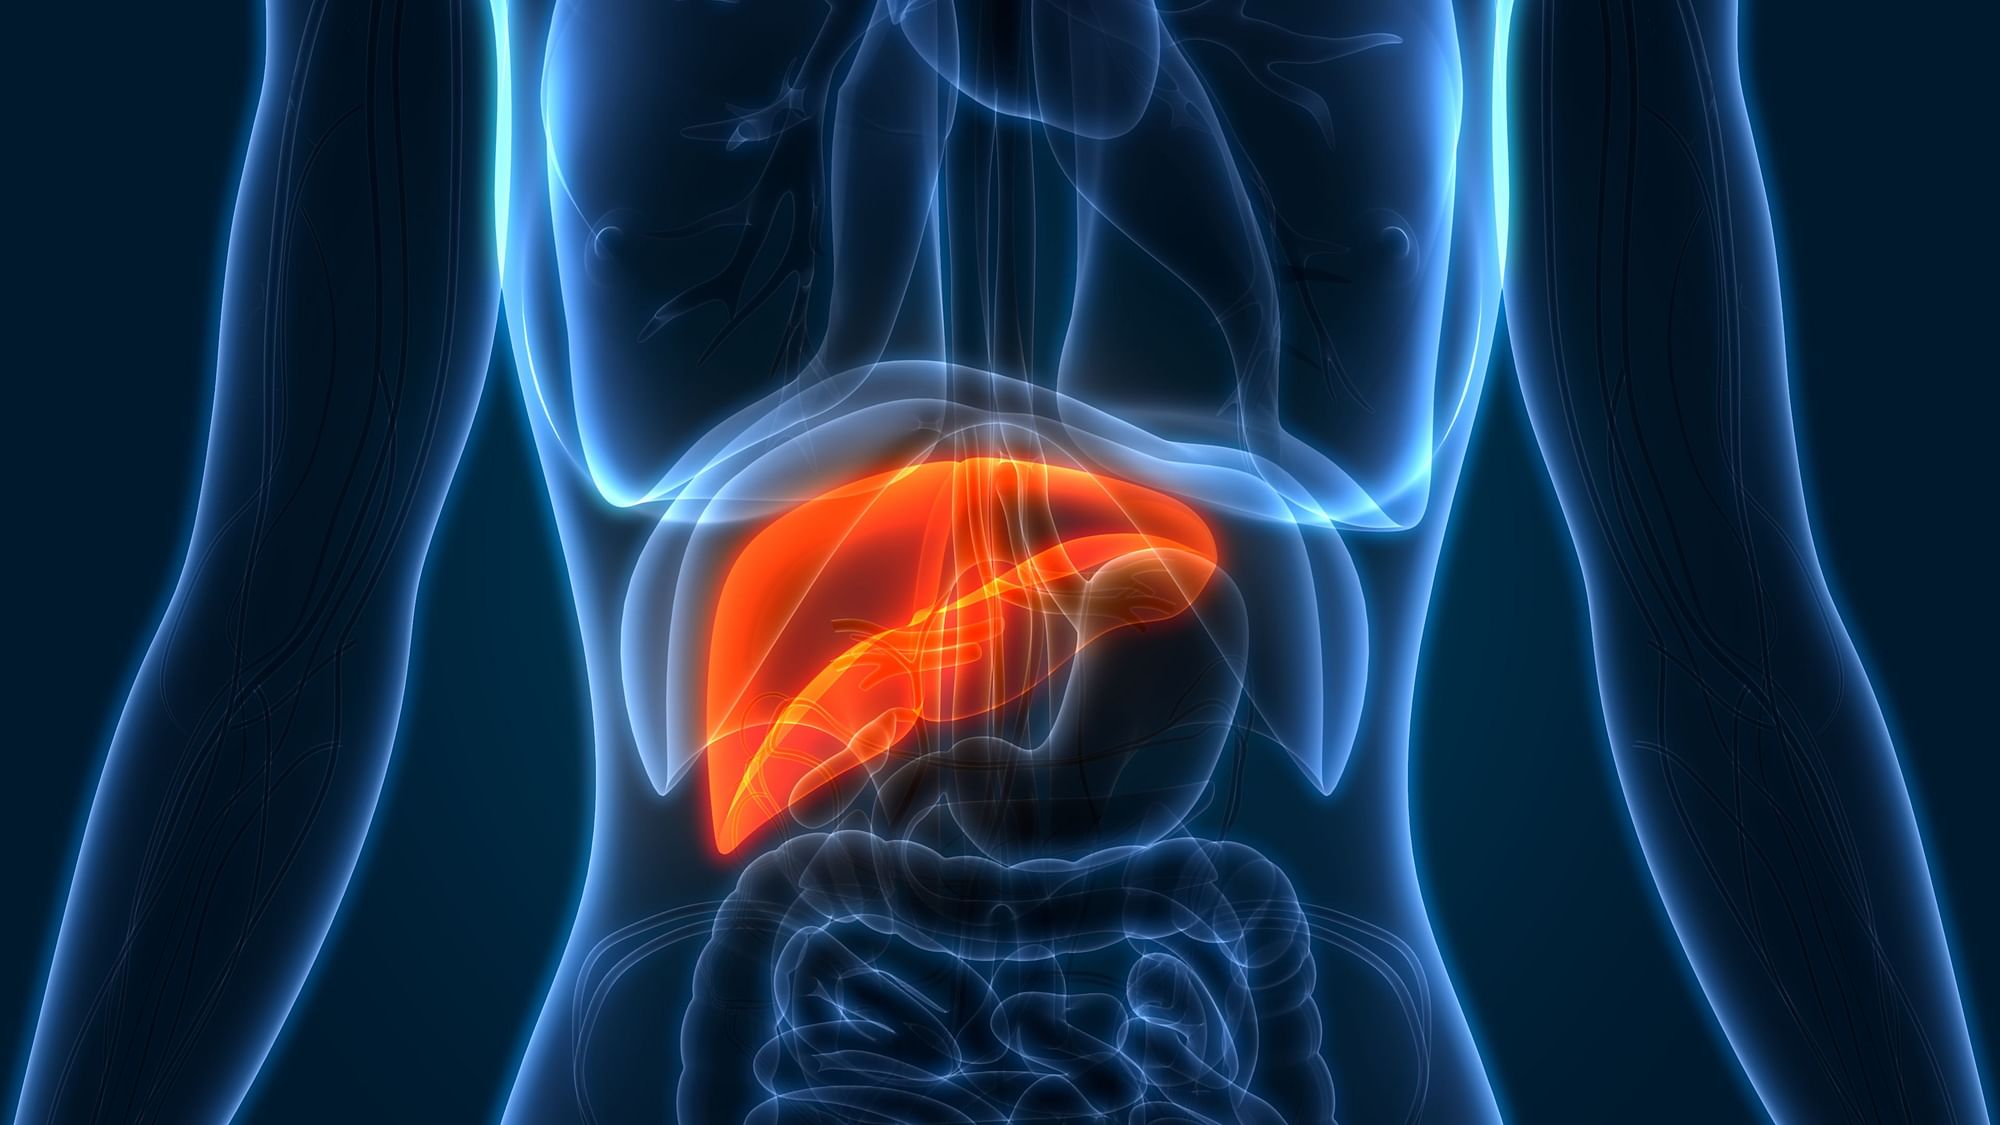 Liver cancer deaths are up by 50%  in last 10 years.